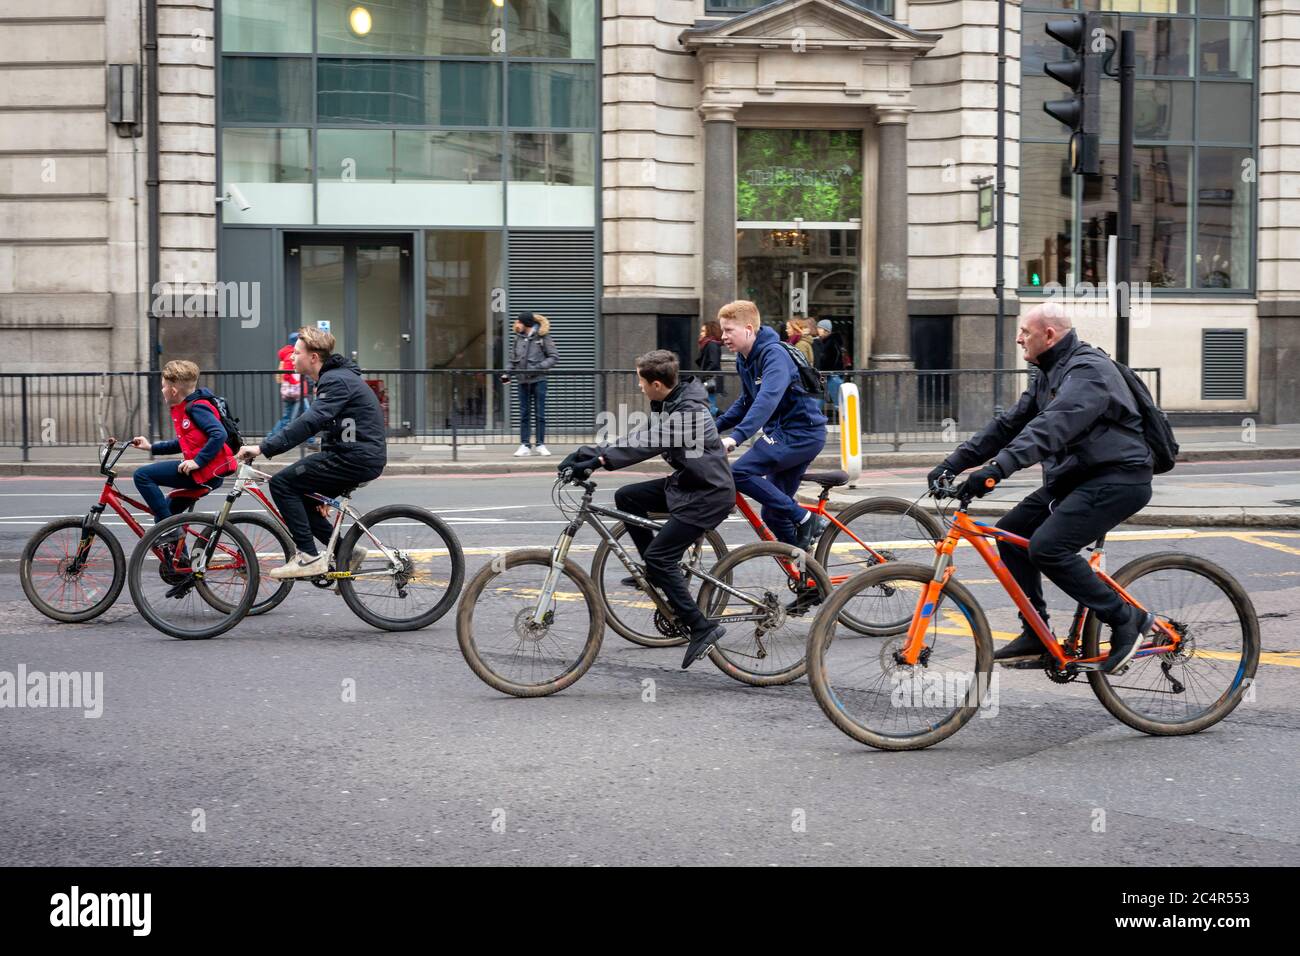 Street view of group of teenagers and one adult cycling casual careless and unprotected with no helmets on King William Street in the London City on Sunday morning, London, UK Stock Photo